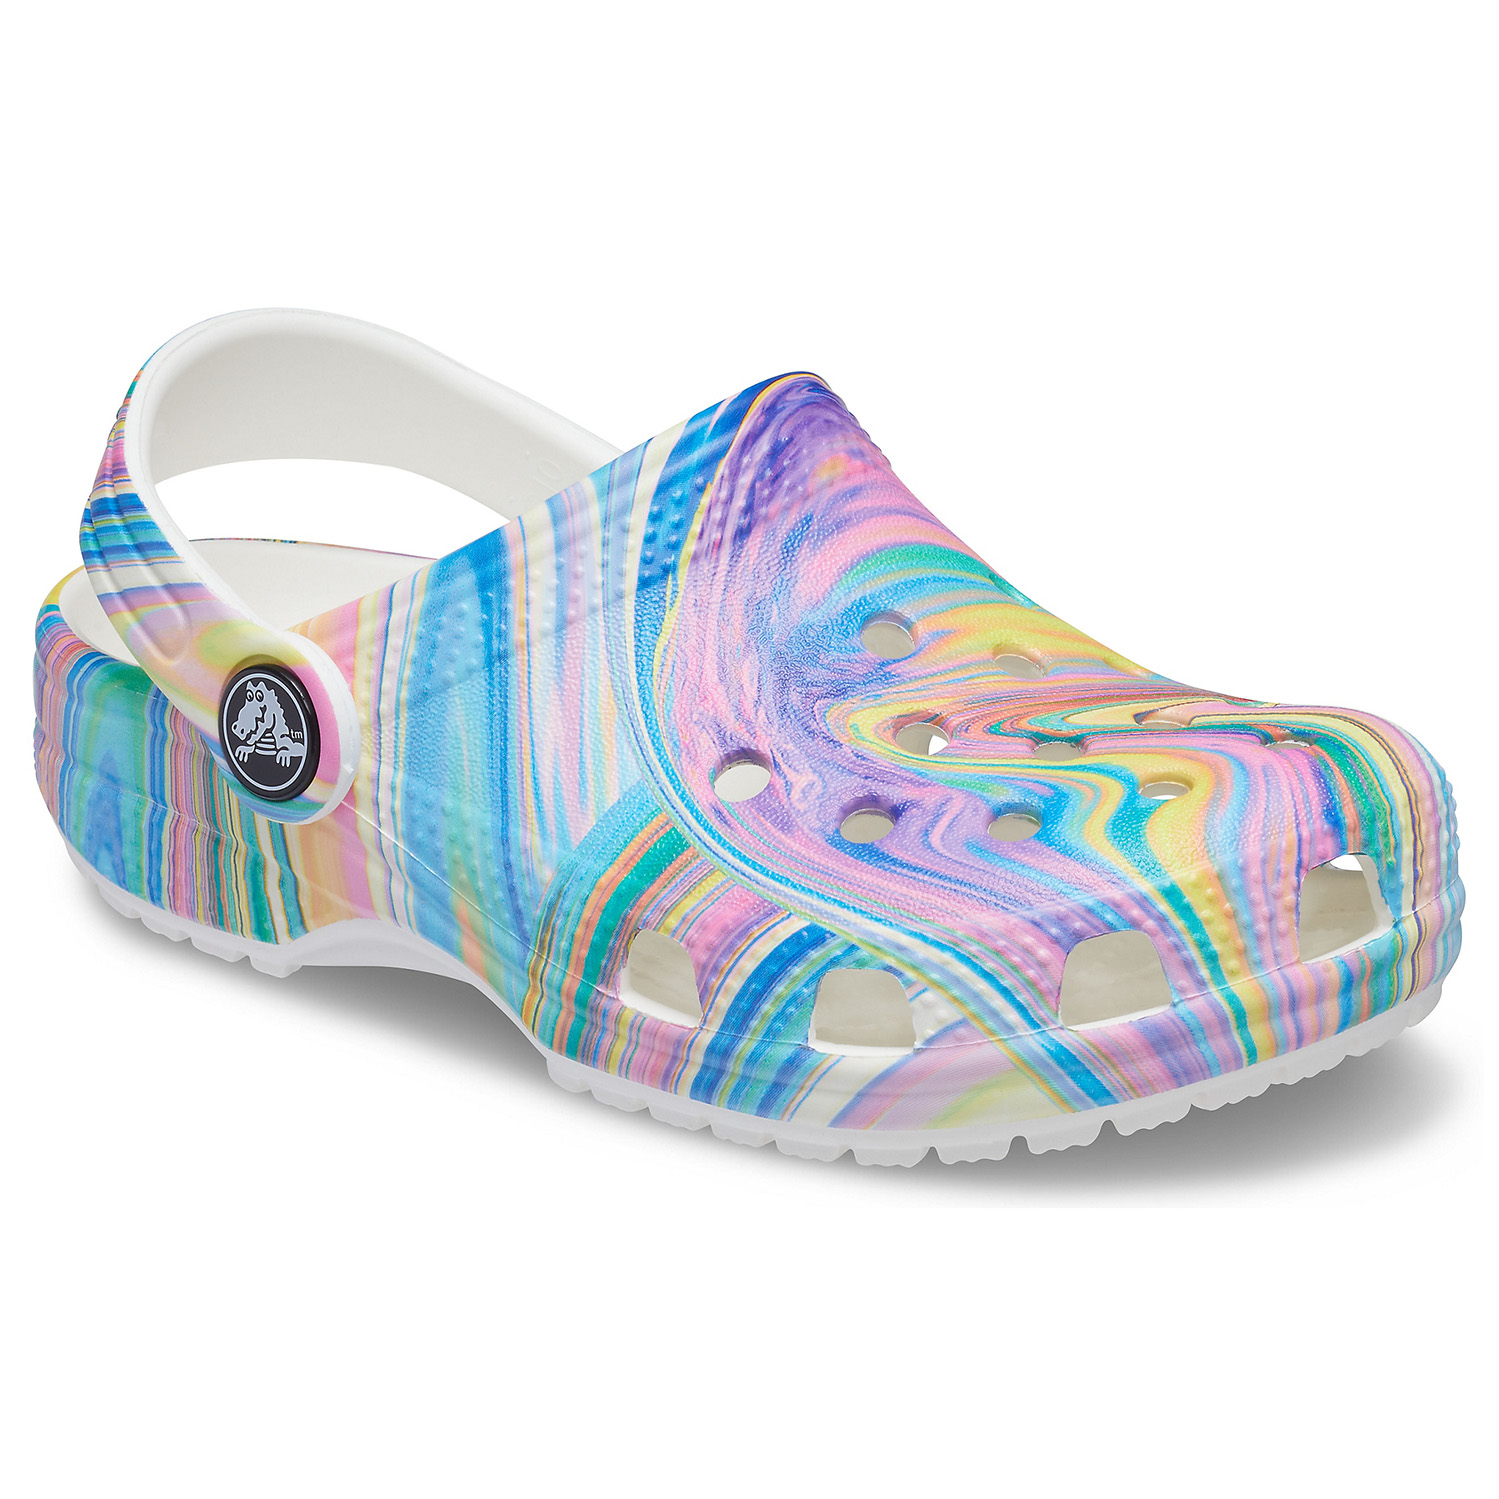 Crocs Classic Out of this World II Clog K Kinder Clog Roomy Fit 206918